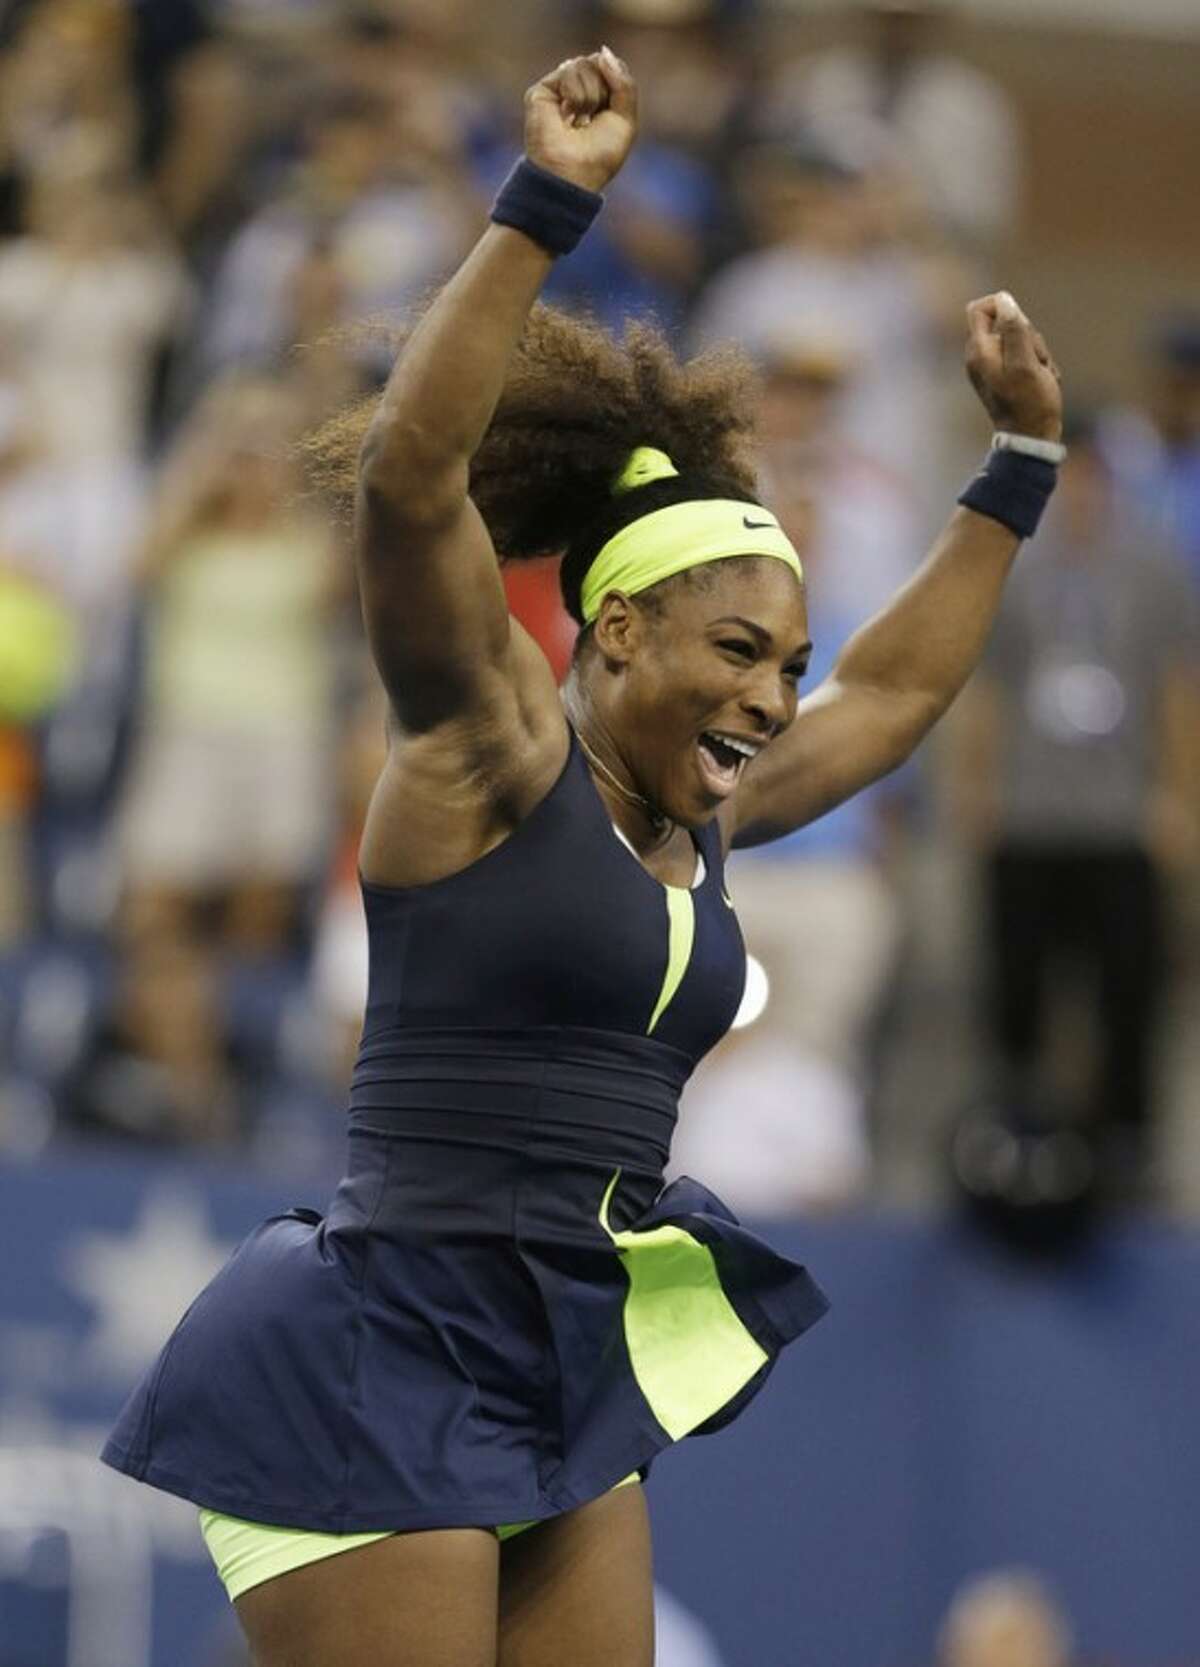 Serena Williams reacts after beating Victoria Azarenka, of Belarus, in the championship match at the 2012 US Open tennis tournament, Sunday, Sept. 9, 2012, in New York. (AP Photo/Darron Cummings)